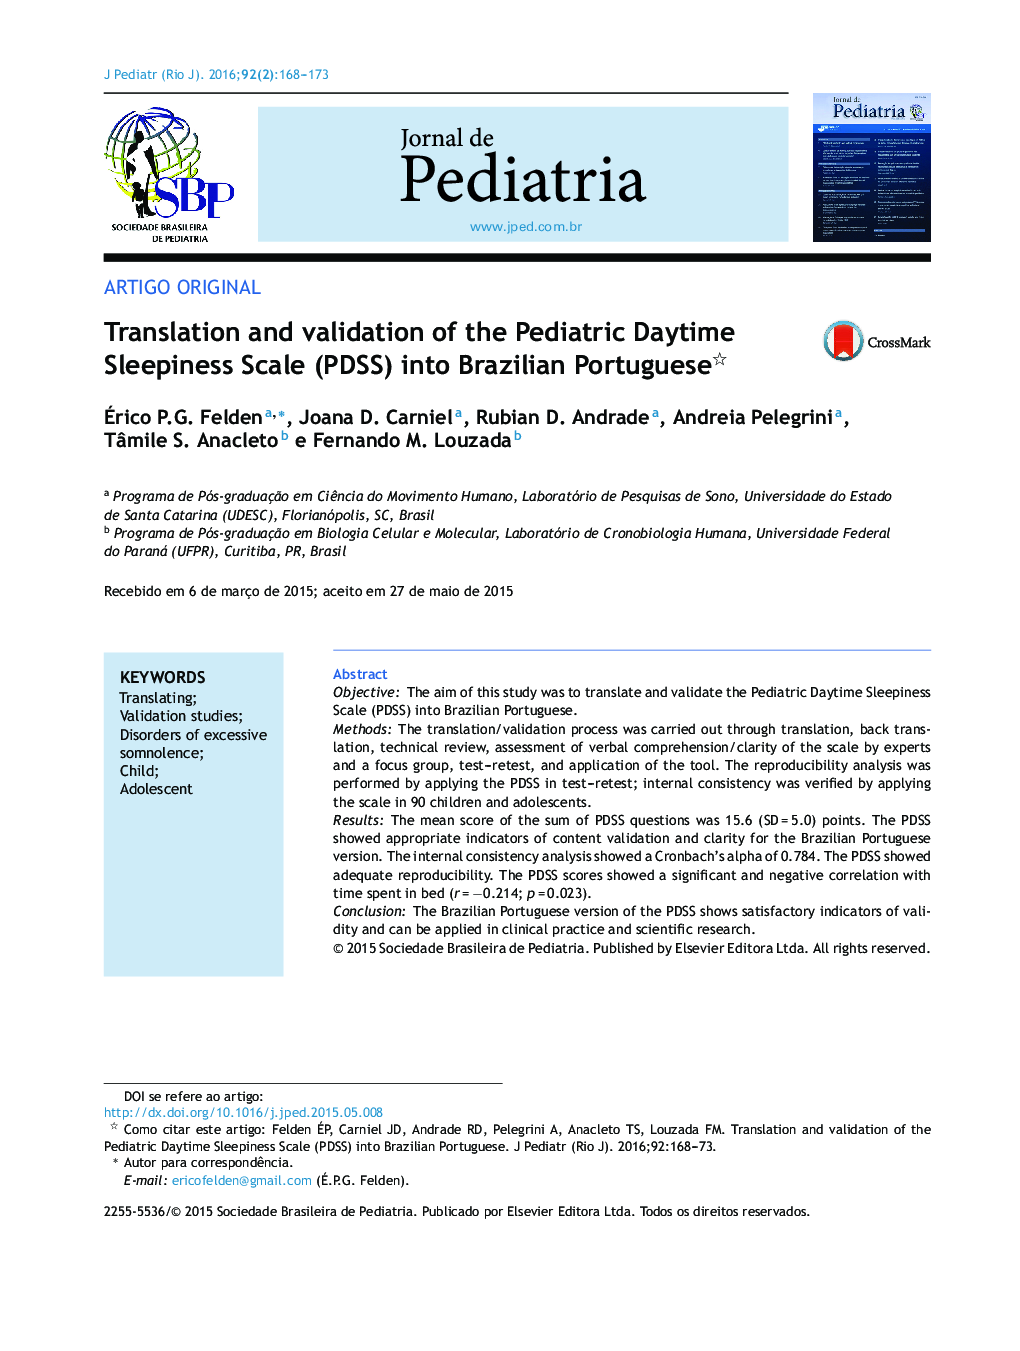 Translation and validation of the Pediatric Daytime Sleepiness Scale (PDSS) into Brazilian Portuguese 